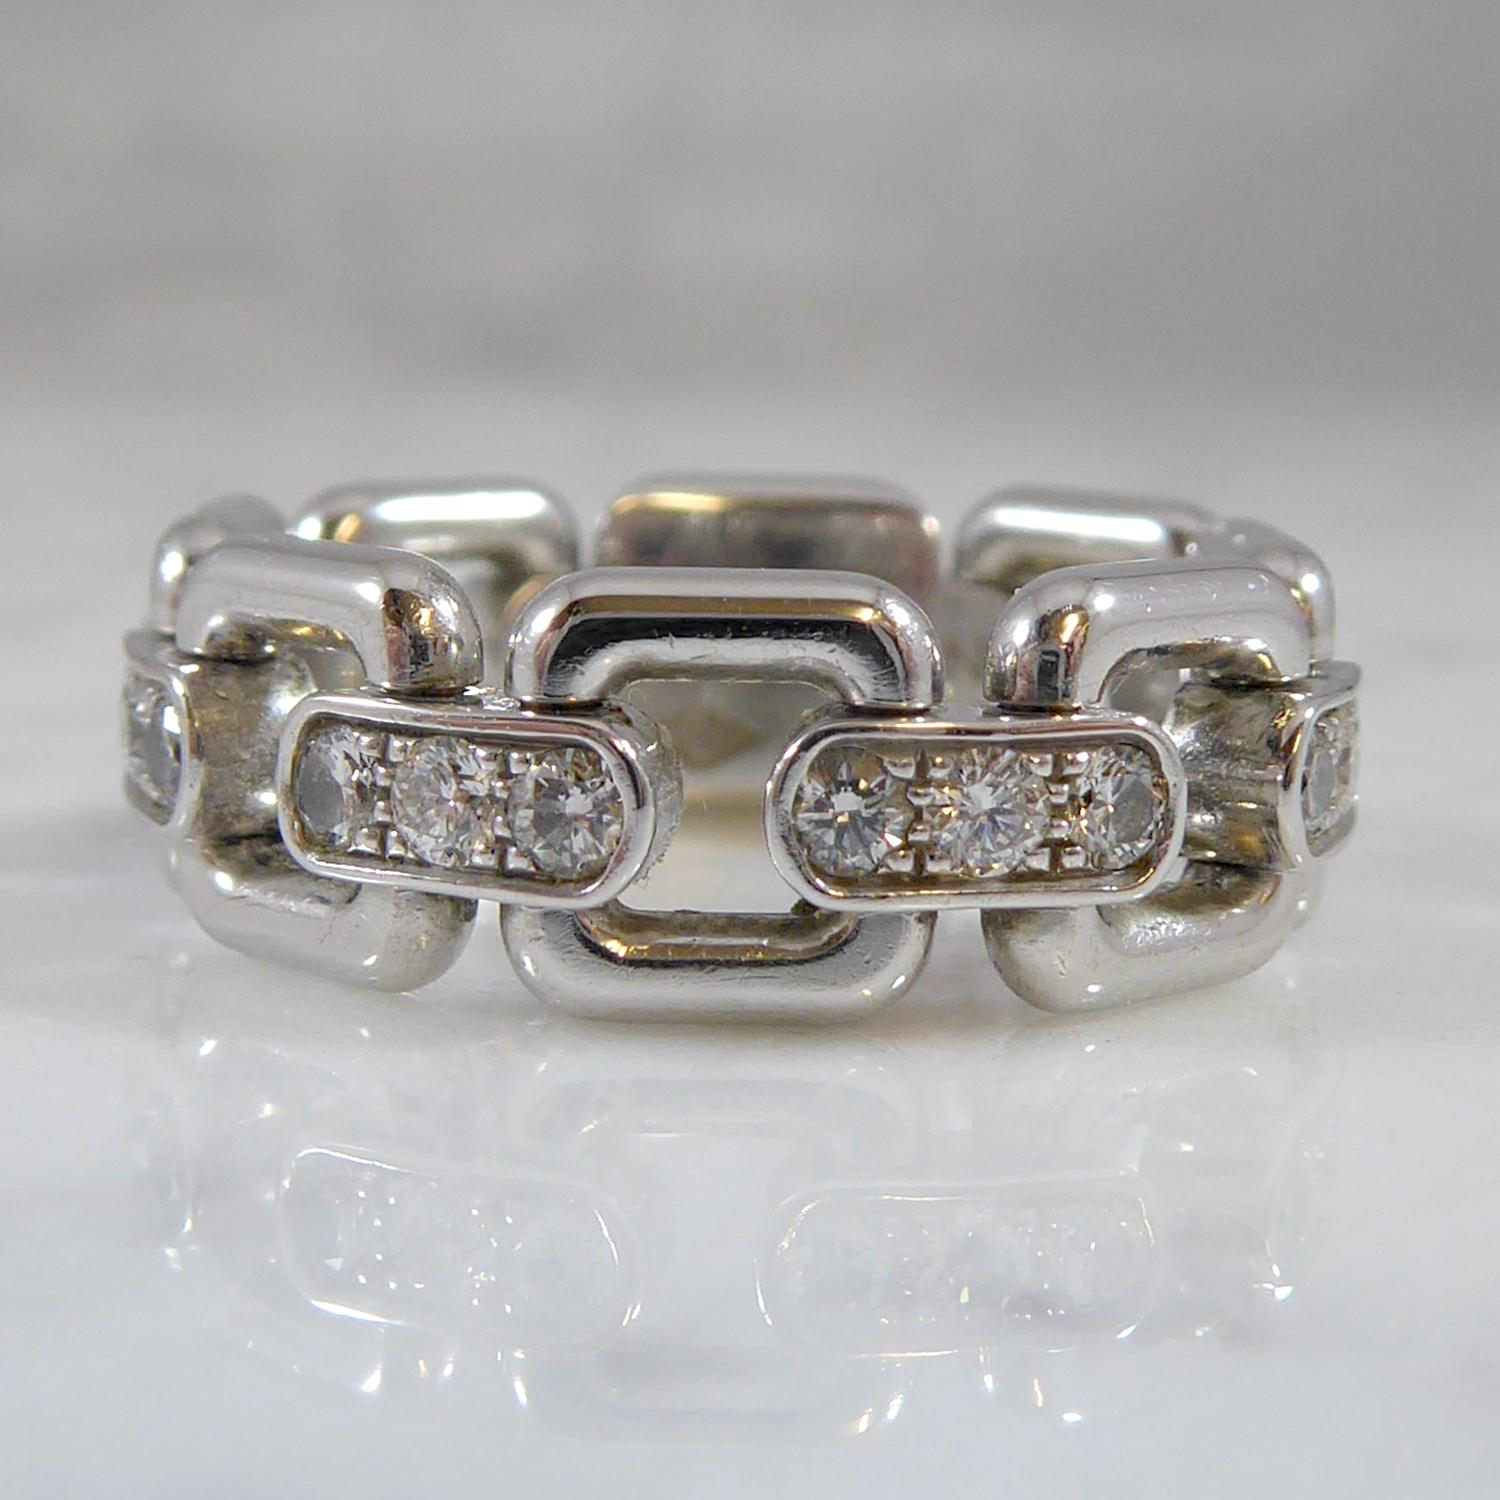 No longer in production, this diamond set designer ring is a flexible, chain-like band.  Comprising of a white panel, engraved 